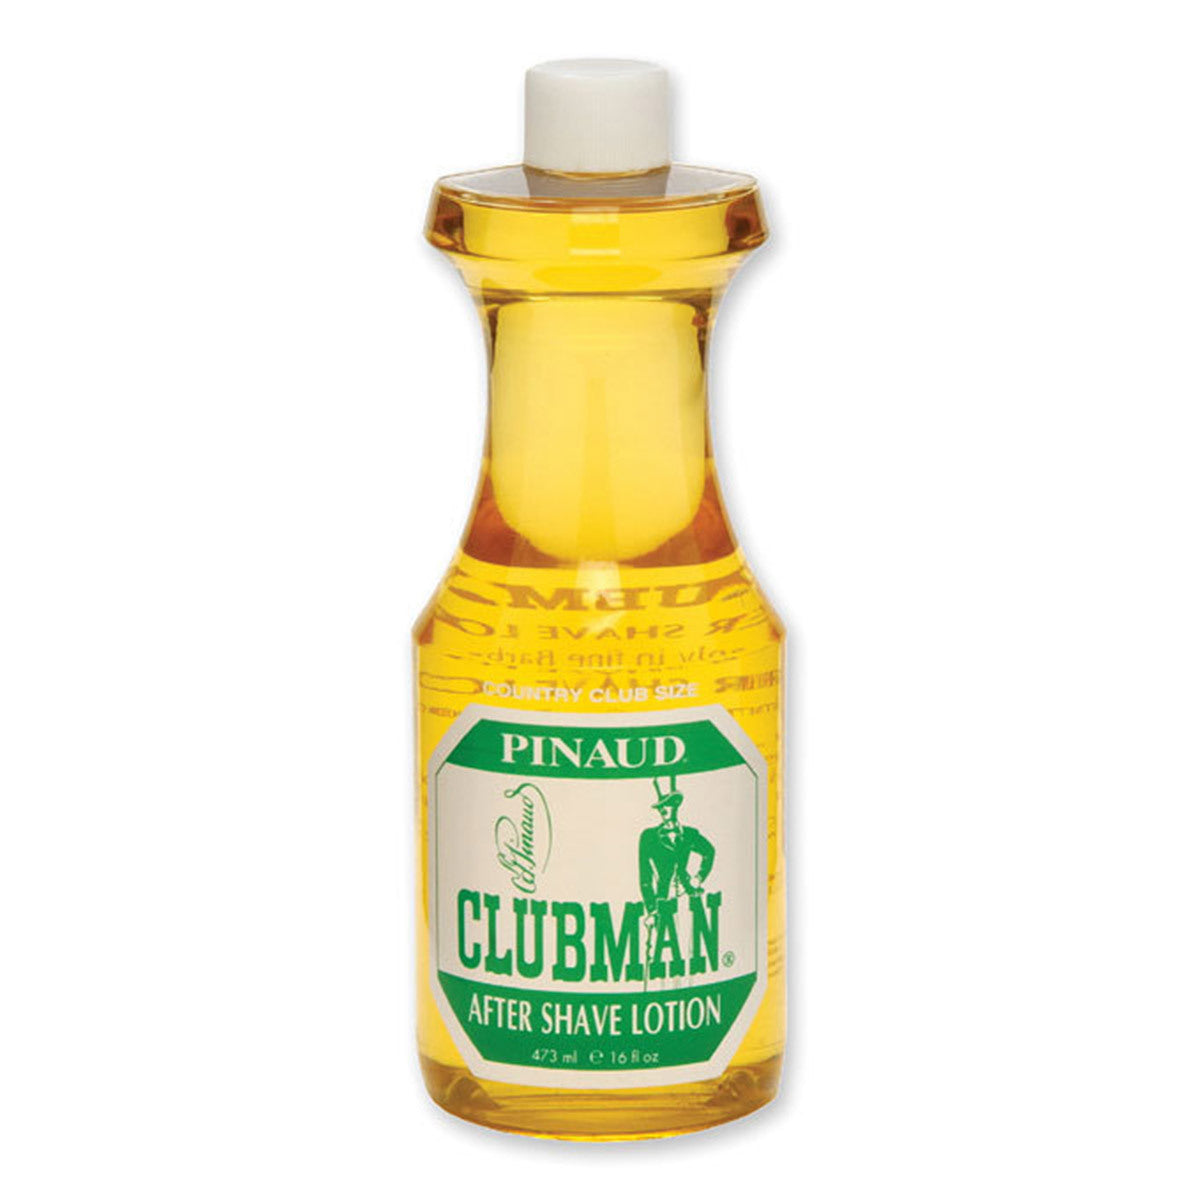 Primary image of Clubman After Shave Lotion